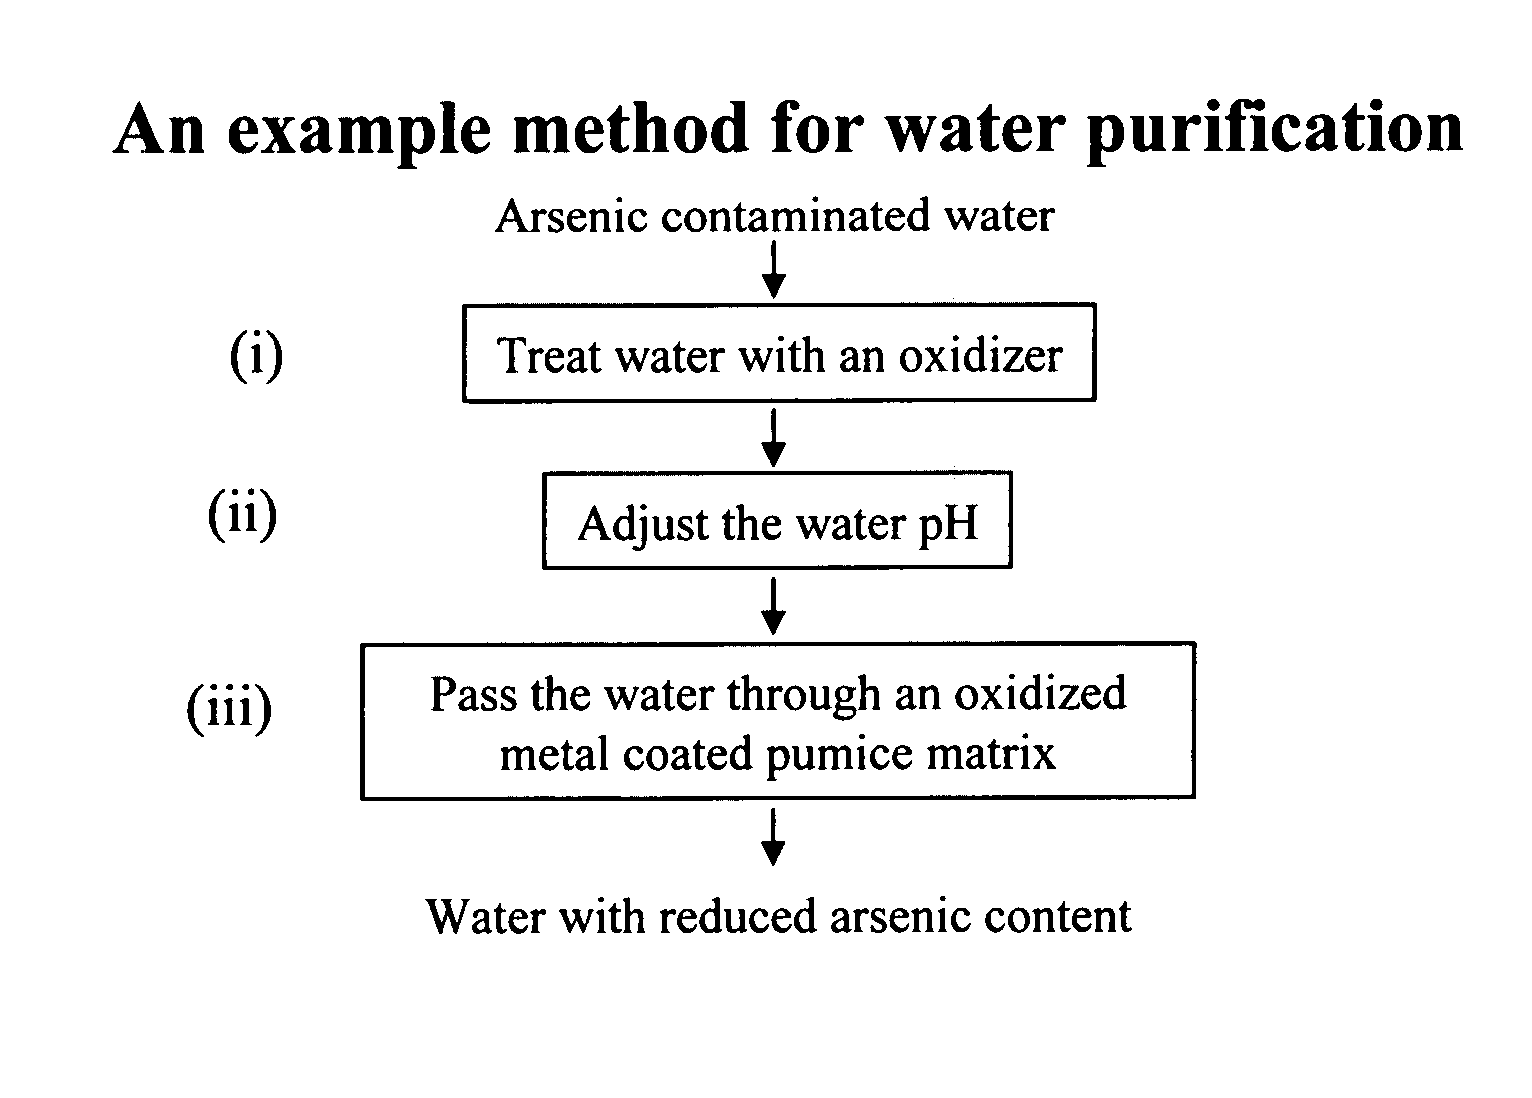 Removal of arsenic from water with oxidized metal coated pumice